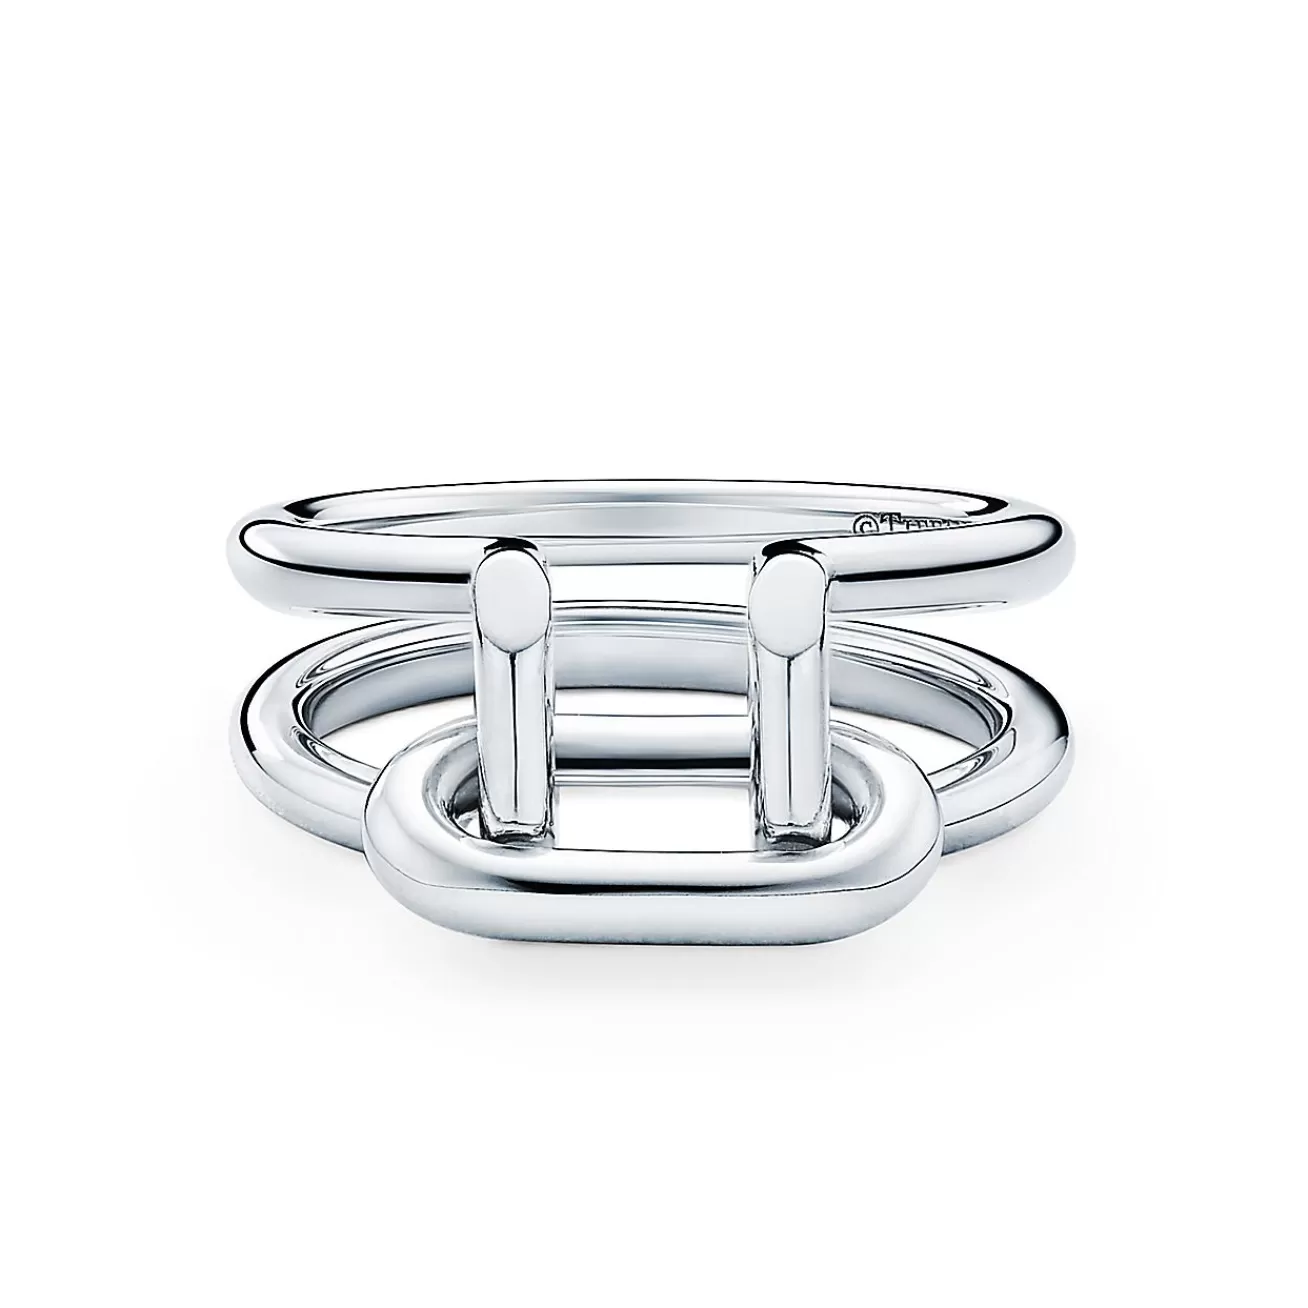 Tiffany & Co. Tiffany HardWear two-row ring in sterling silver. | ^ Rings | Bold Silver Jewelry